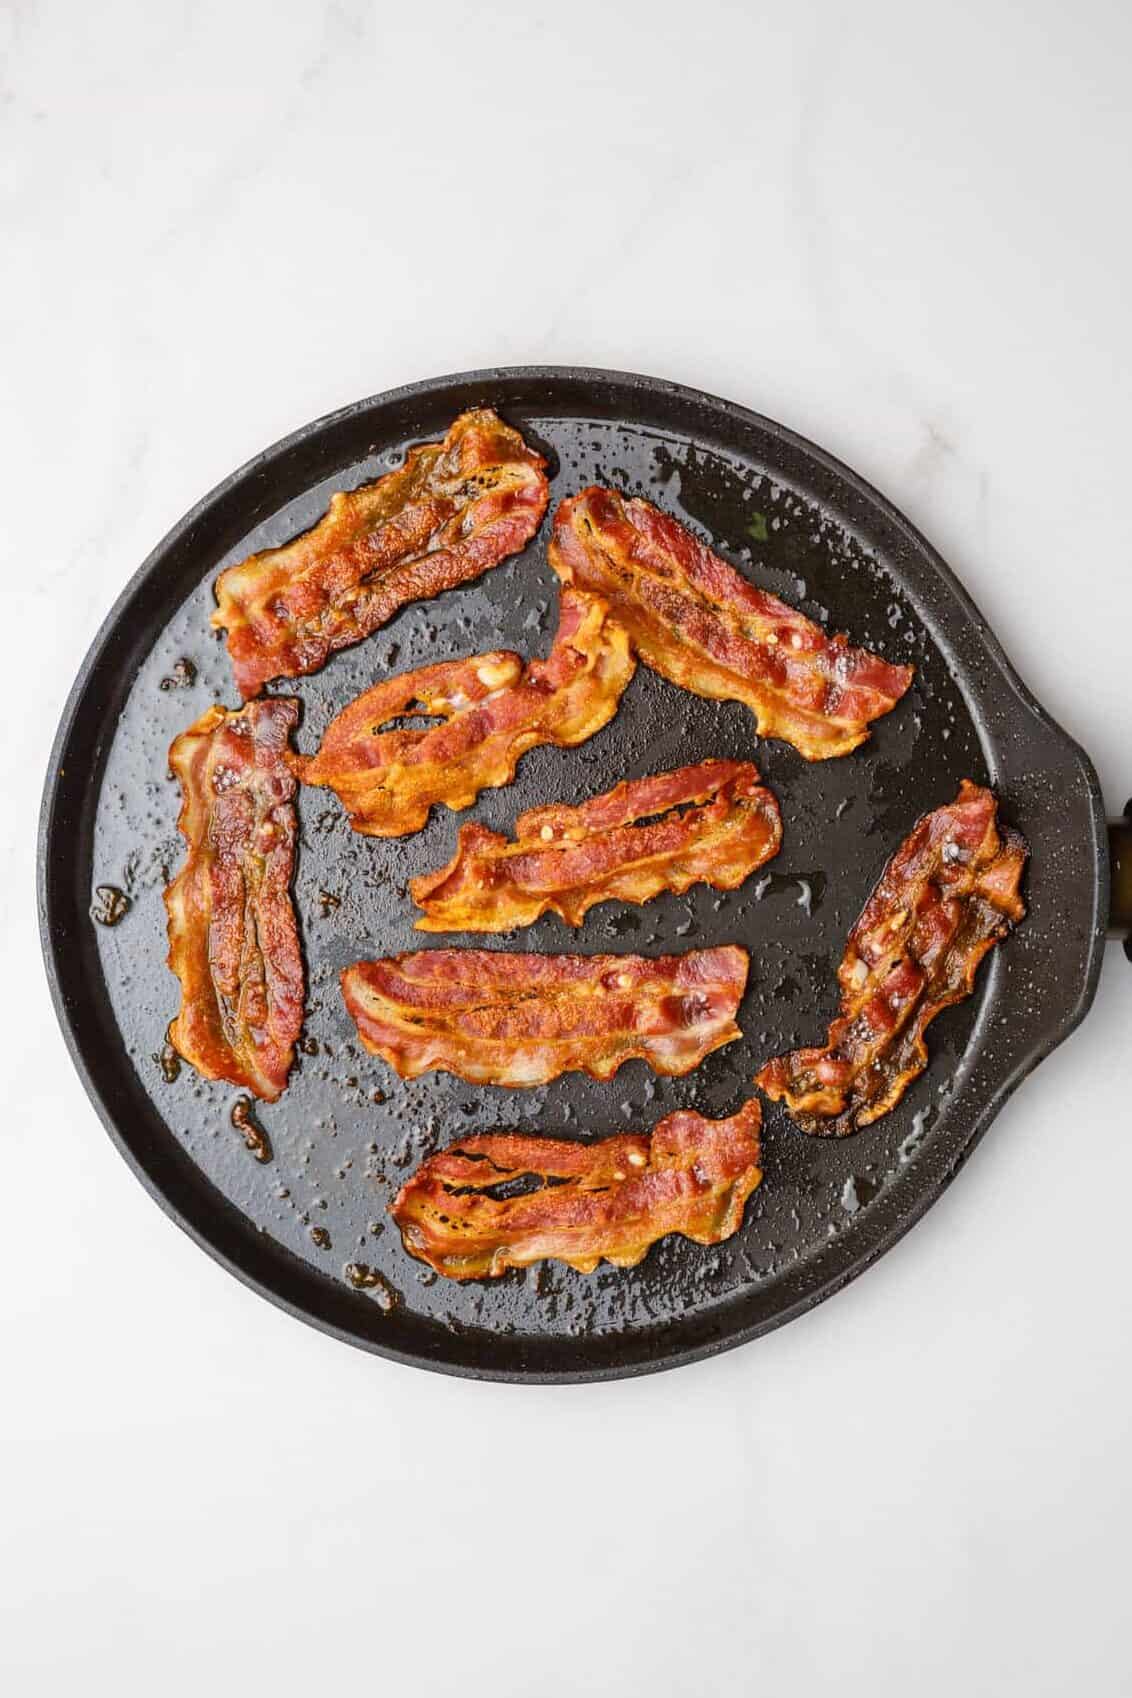 step 1 to make bacon pancakes, cook bacon on a cast iron skillet